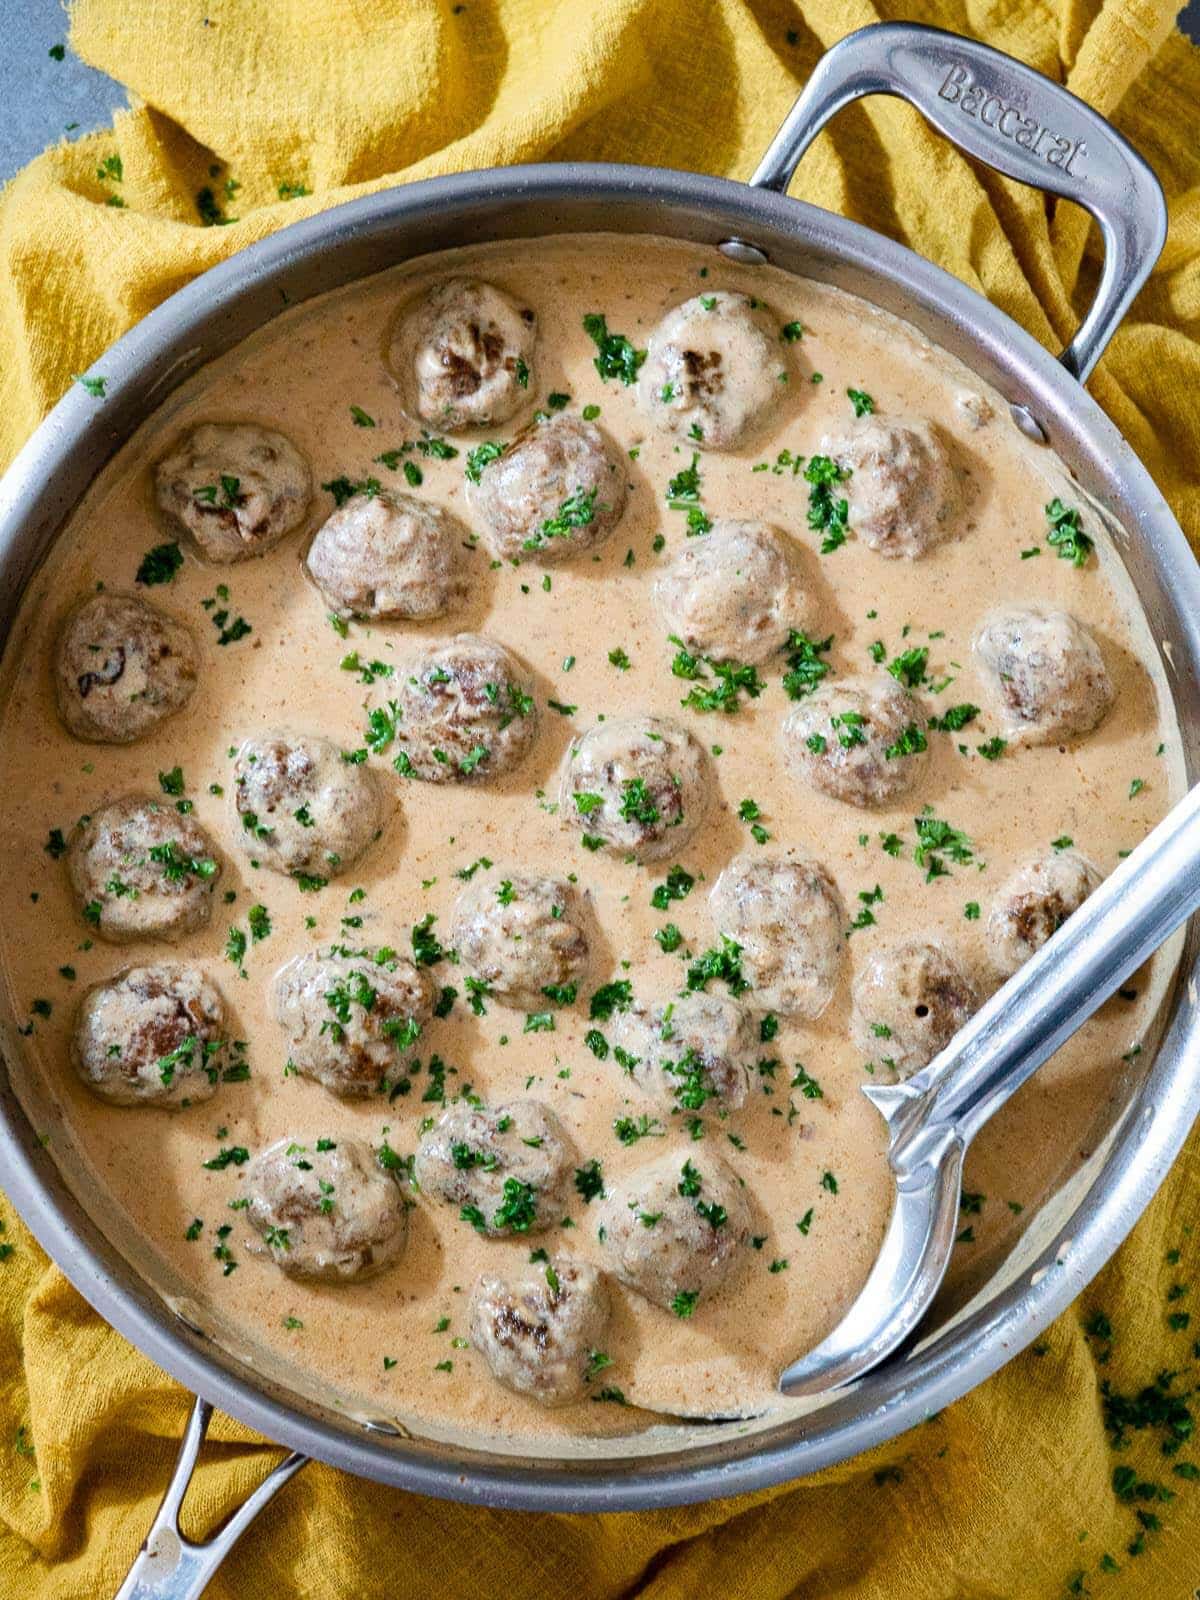 Keto swedish meatballs topped with fresh chopped herbs in a skillet on a yellow kitchen towel.